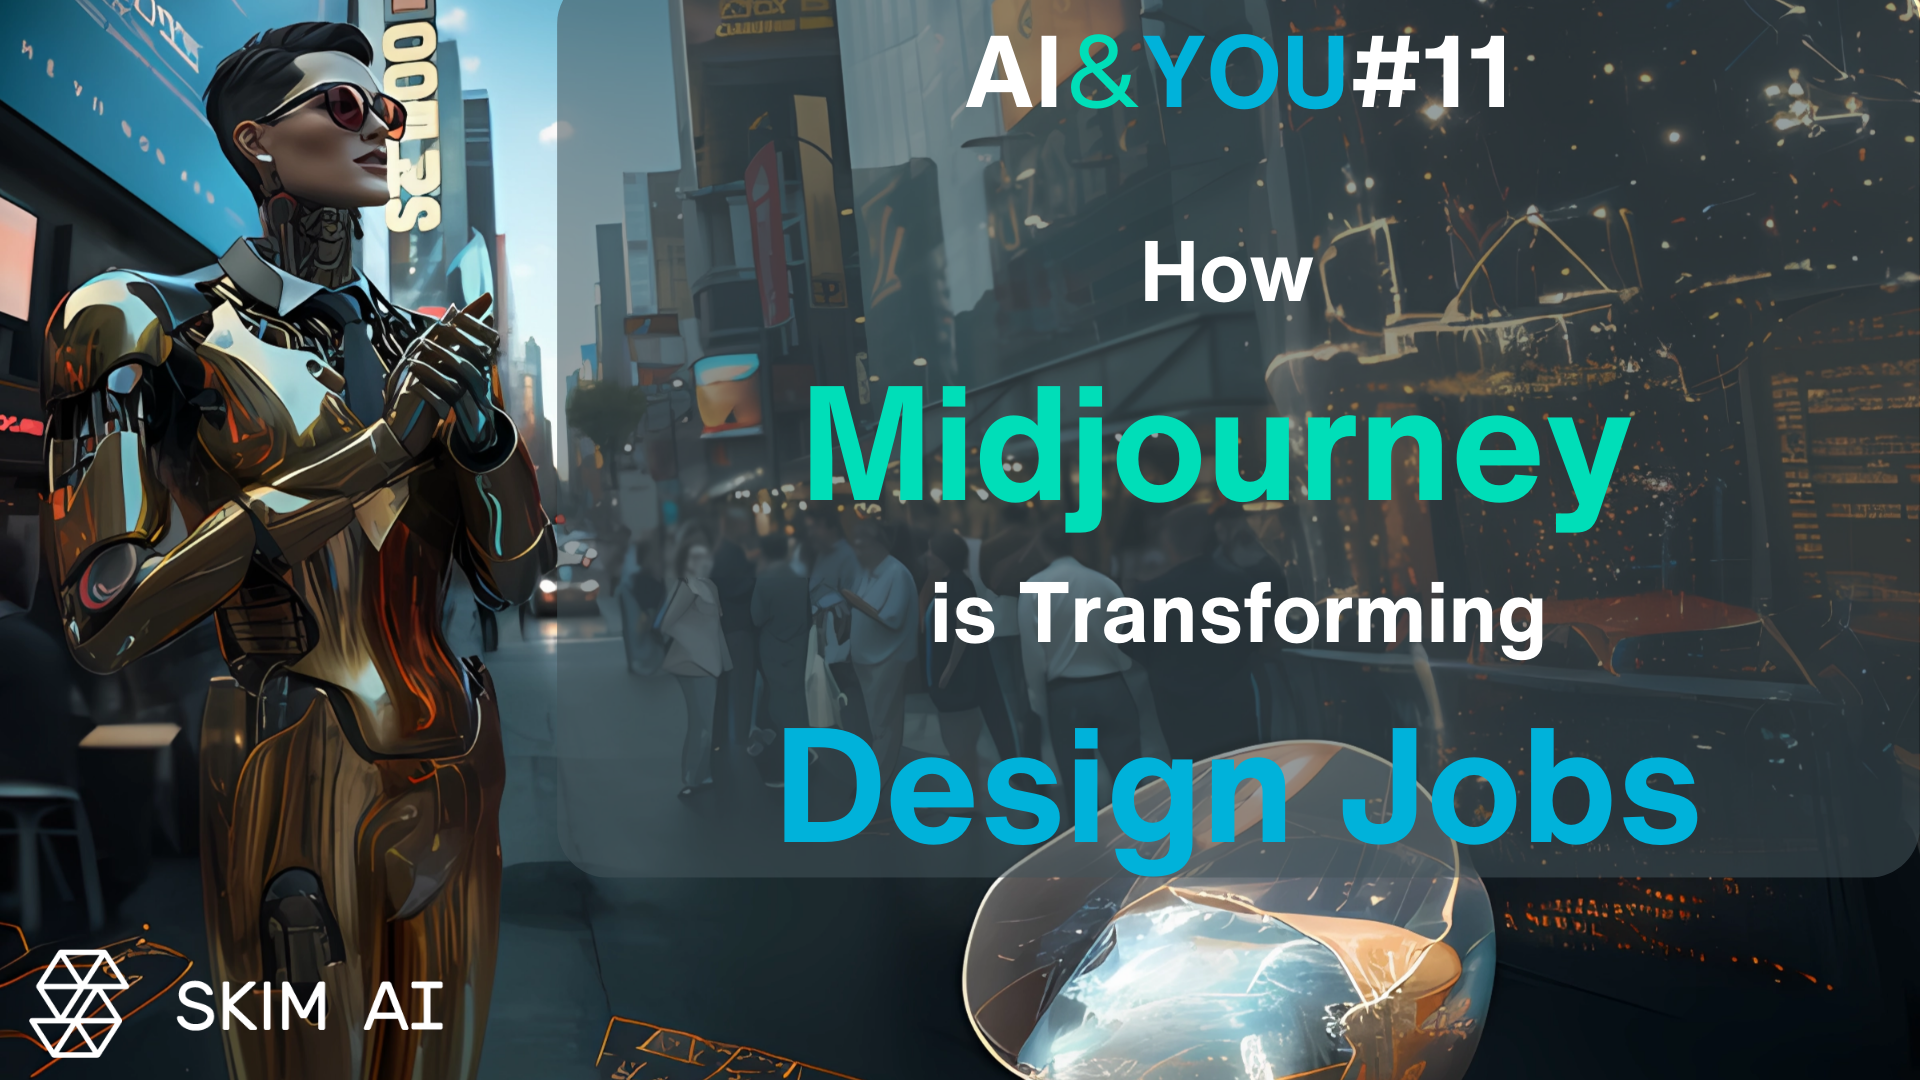 AI & YOU #11: How Midjourney is Transforming Design Jobs